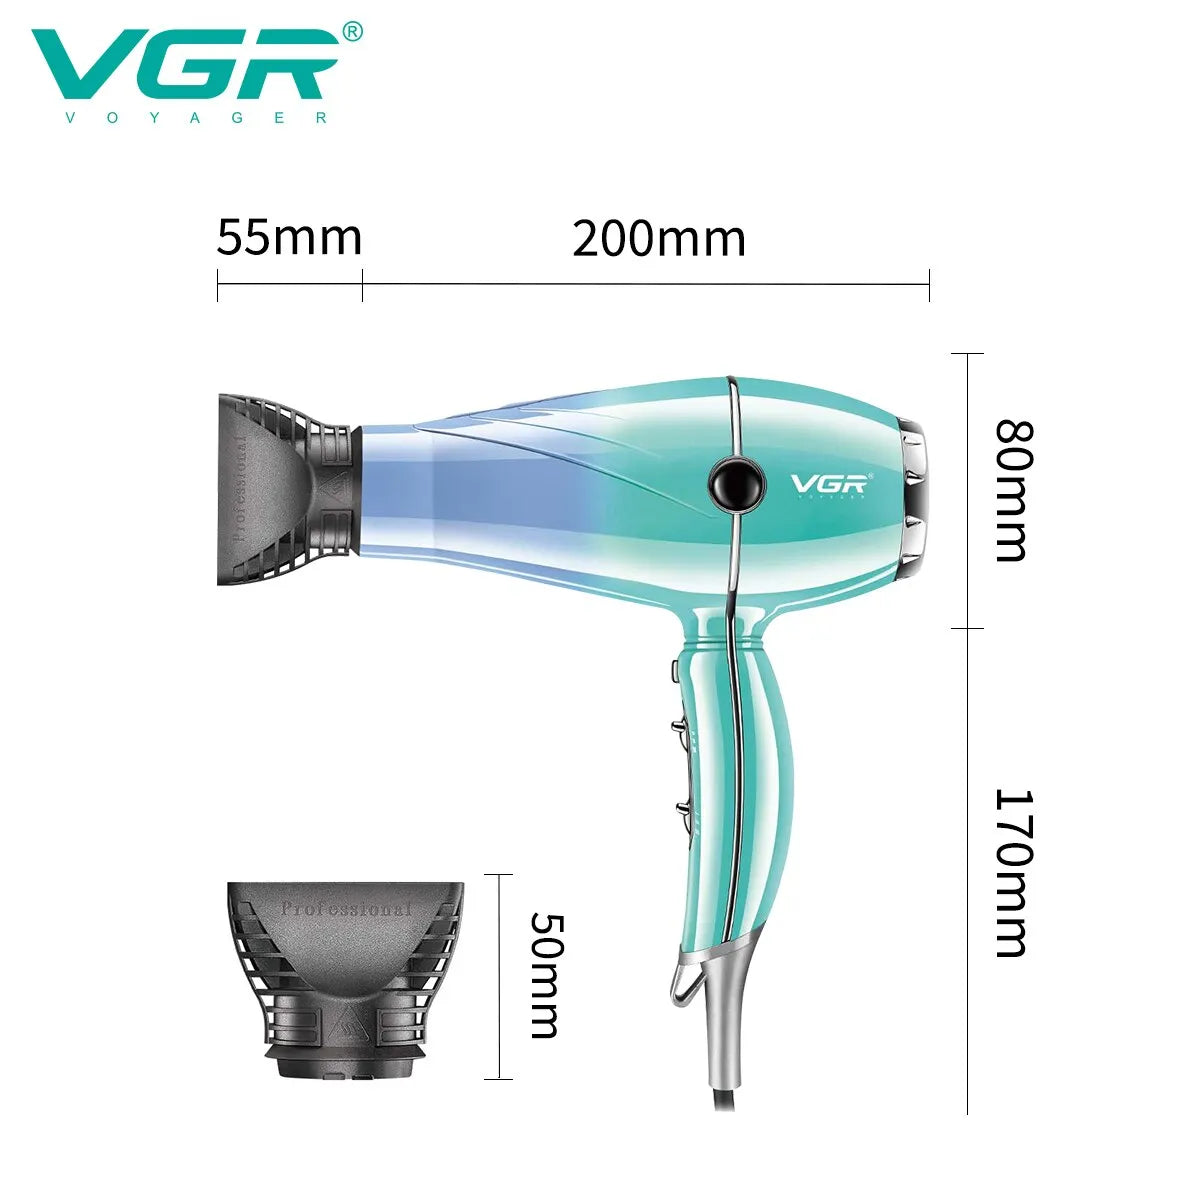 VGR Hair Dryer Professional Hair Dryer 2400W High Power Overheating Protection Strong Wind Drying Hair Care Styling Tool V-452